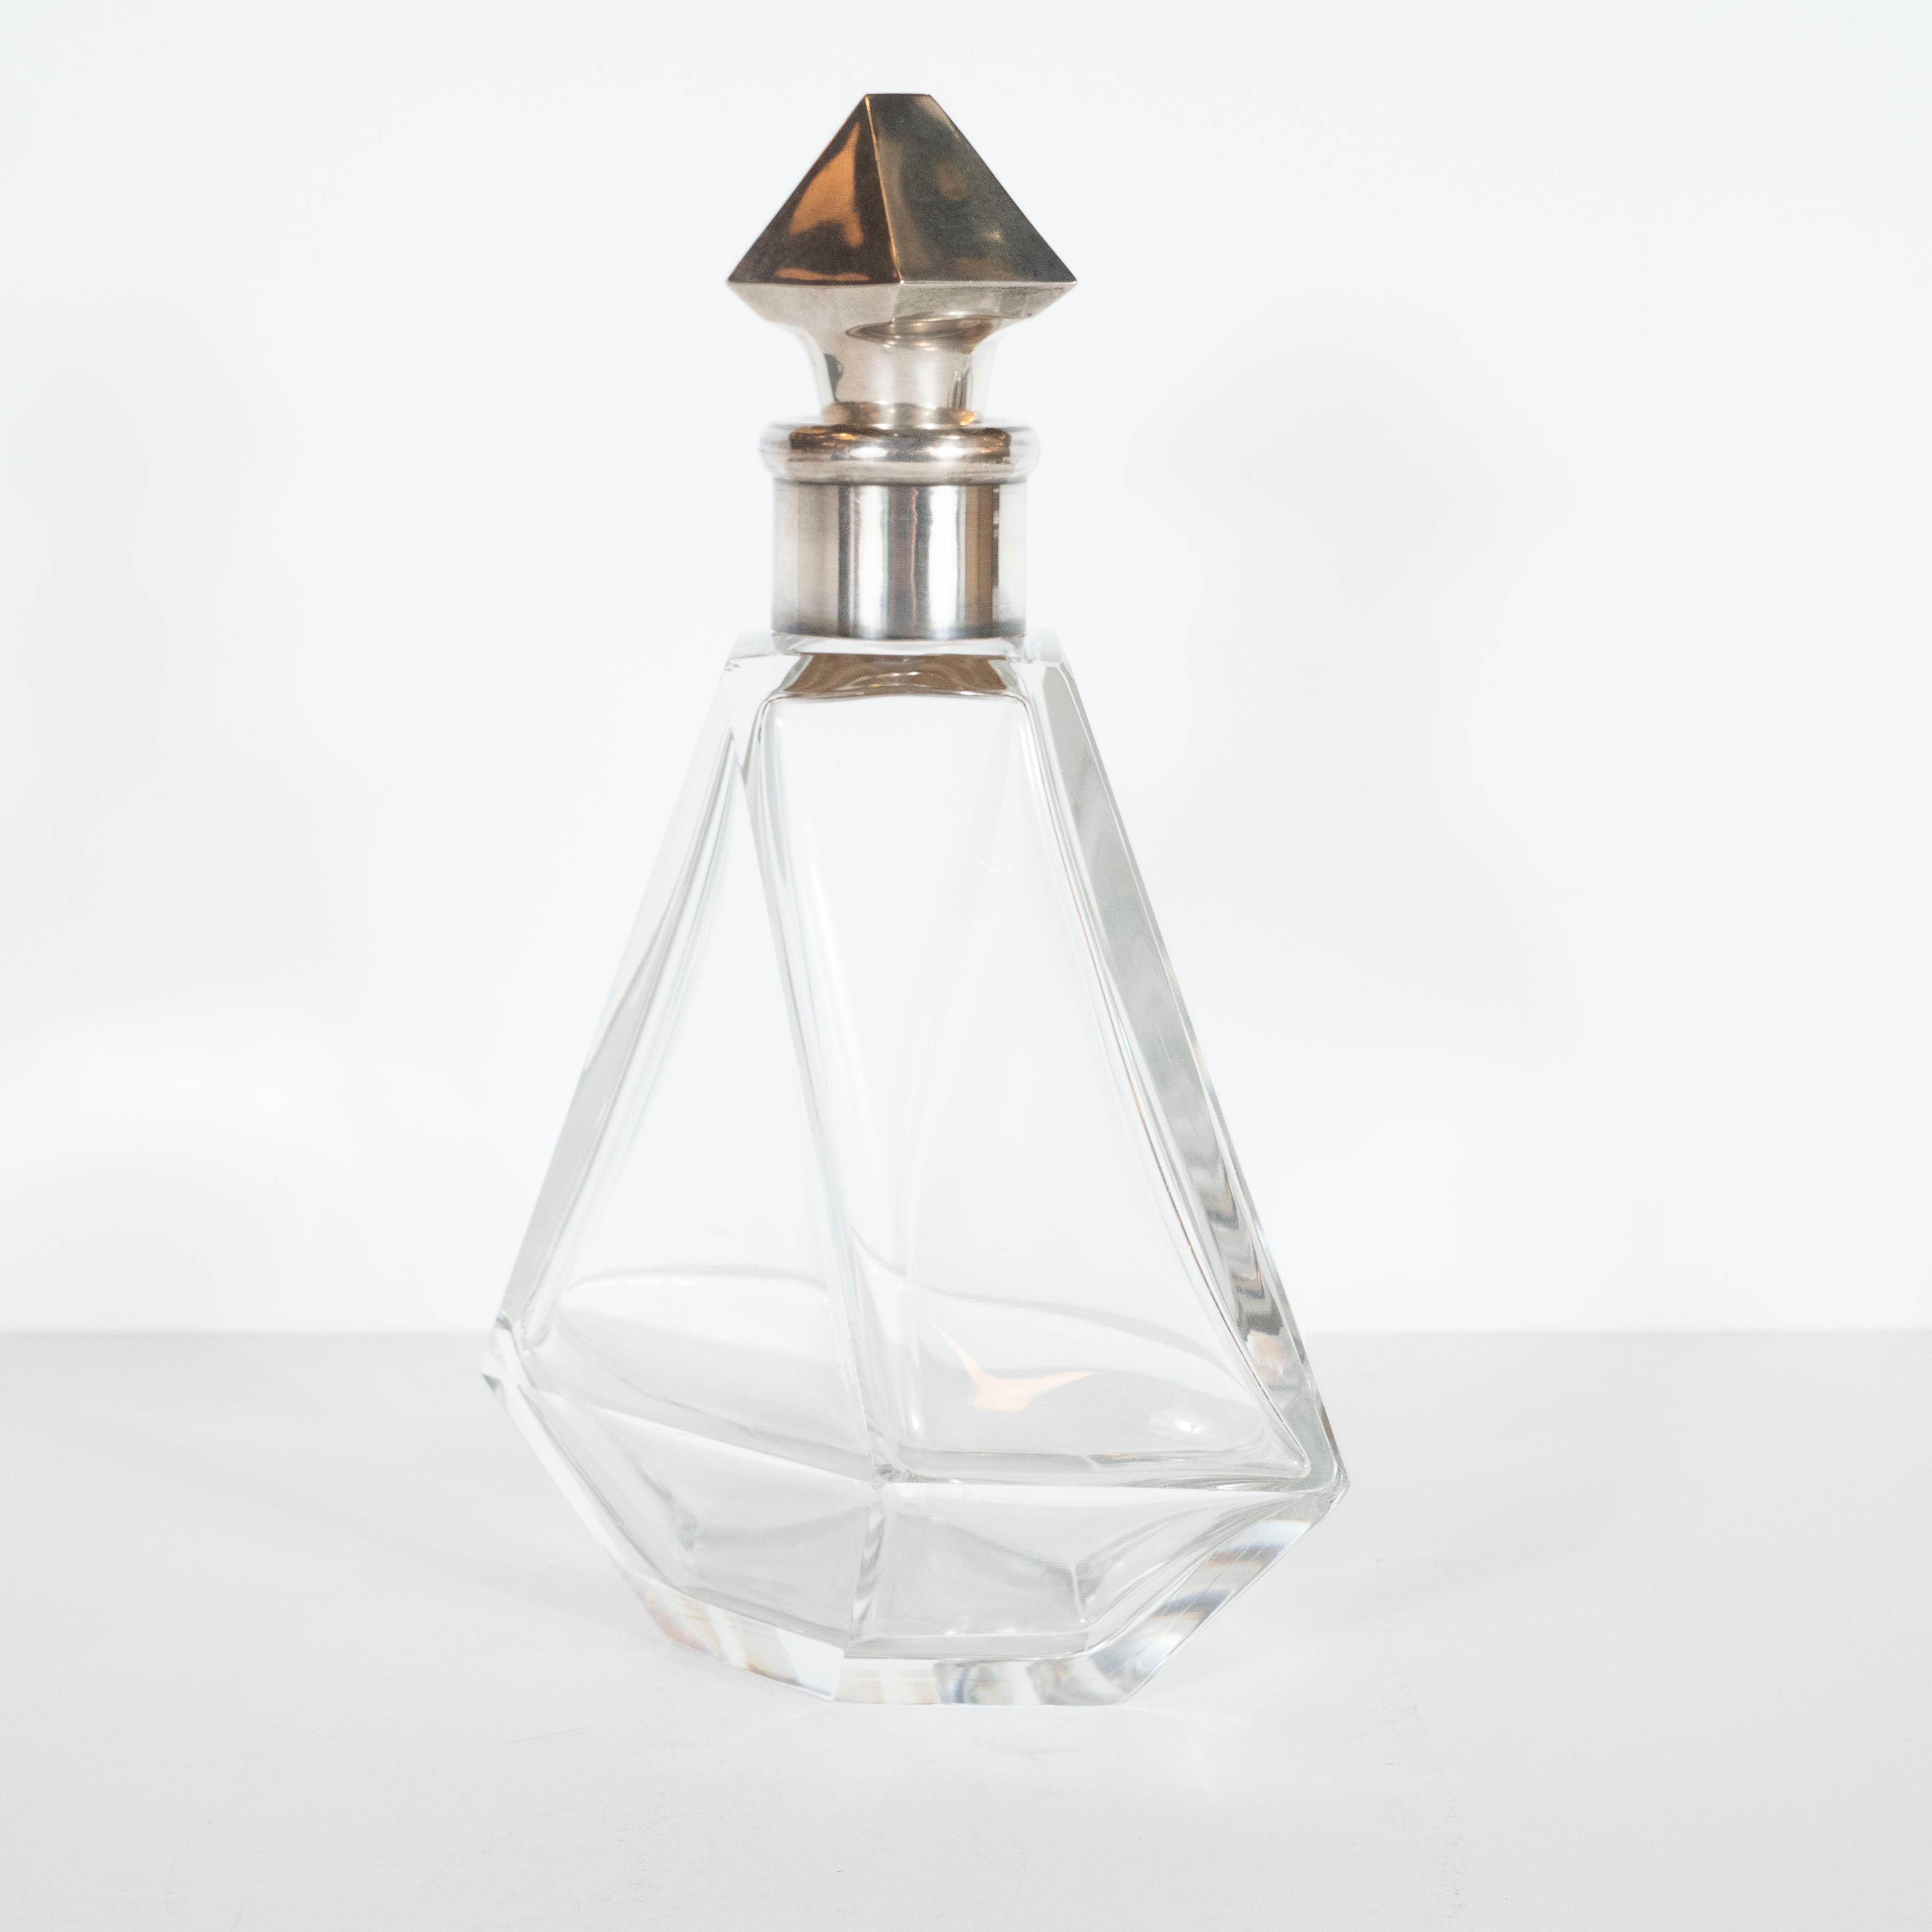 Mid-20th Century French Art Deco Cubist Crystal Decanter with Sterling Silver Neck and Stopper